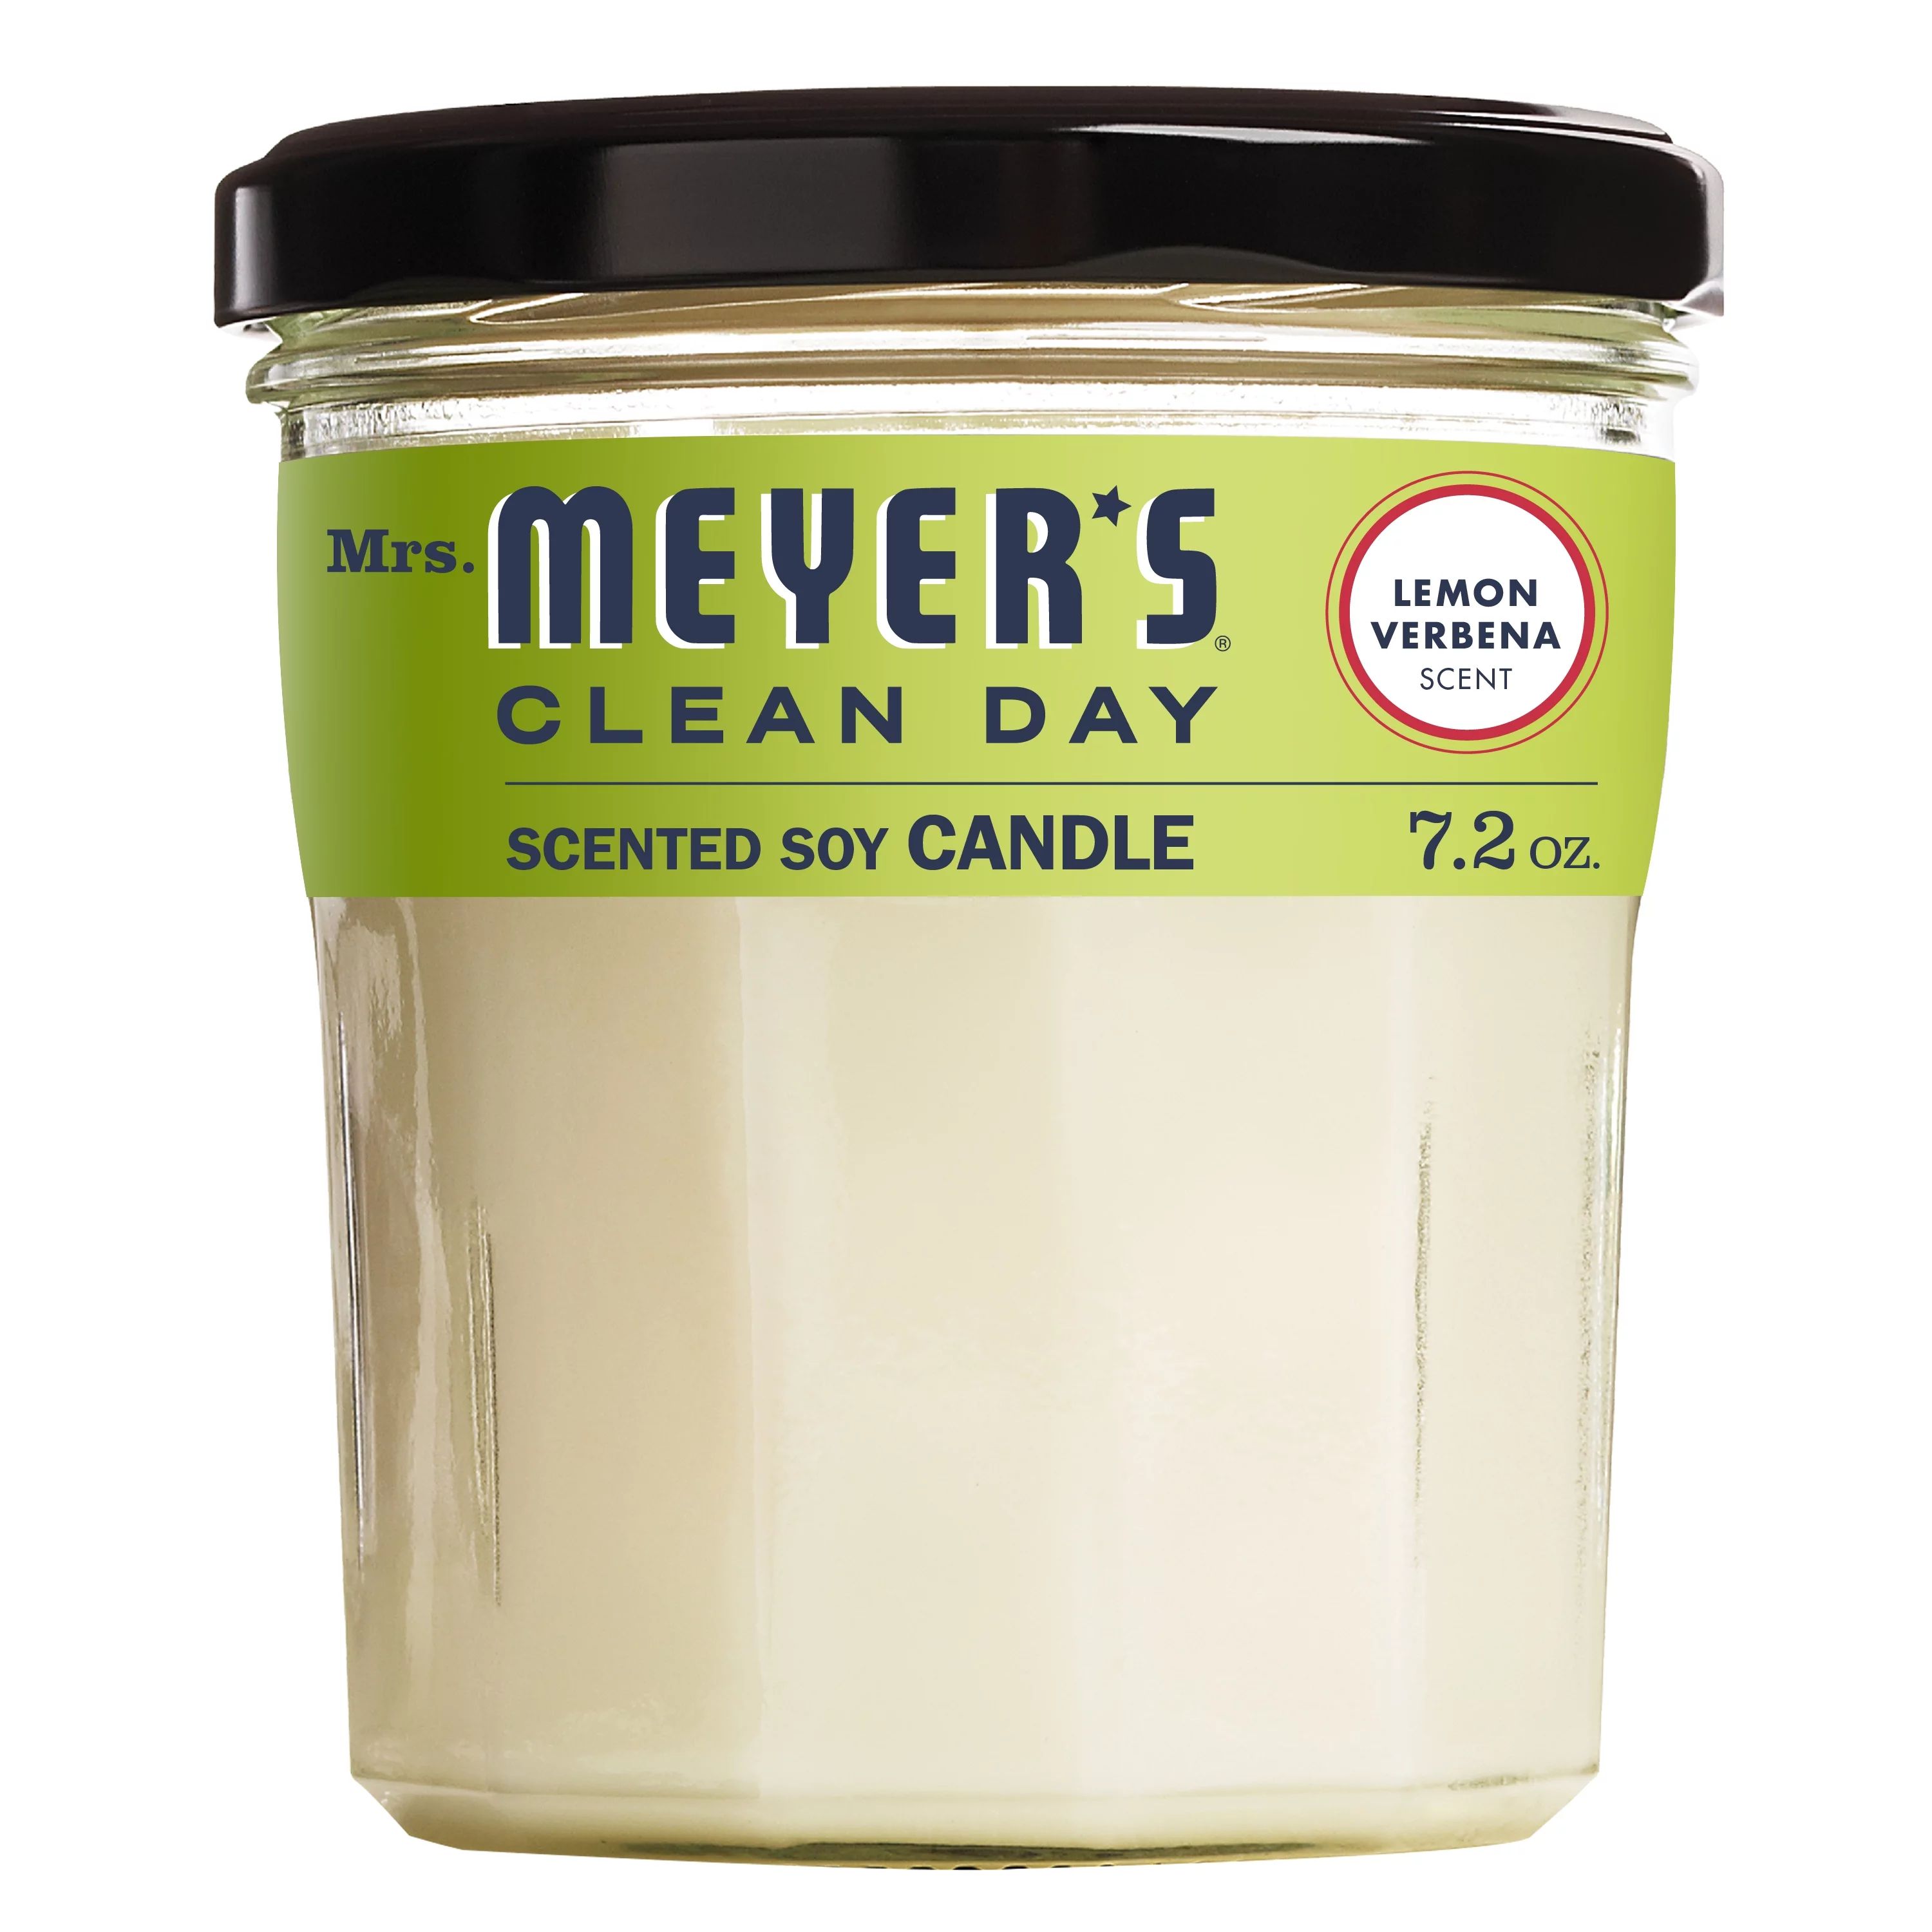 Mrs. Meyer's Clean Day Scented Soy Candle, Lemon Verbena Scent, 7.2 ounce candle | Walmart (US)